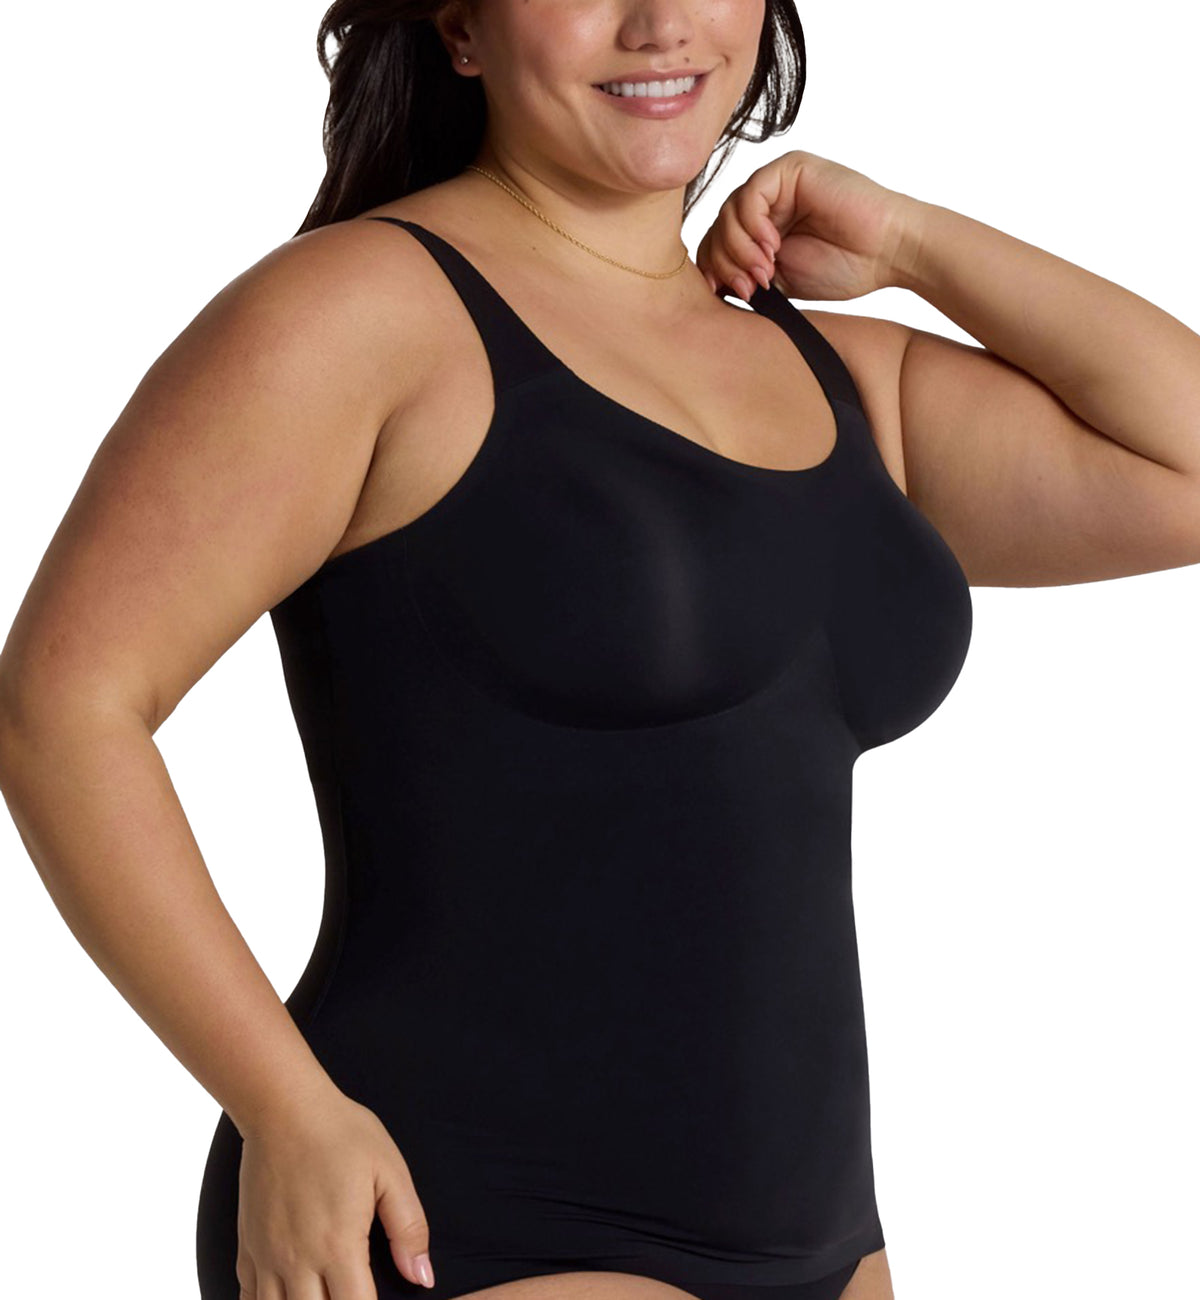 Evelyn &amp; Bobbie Structured Scoop Bra Tank (1811),Small,Black - Black,Small